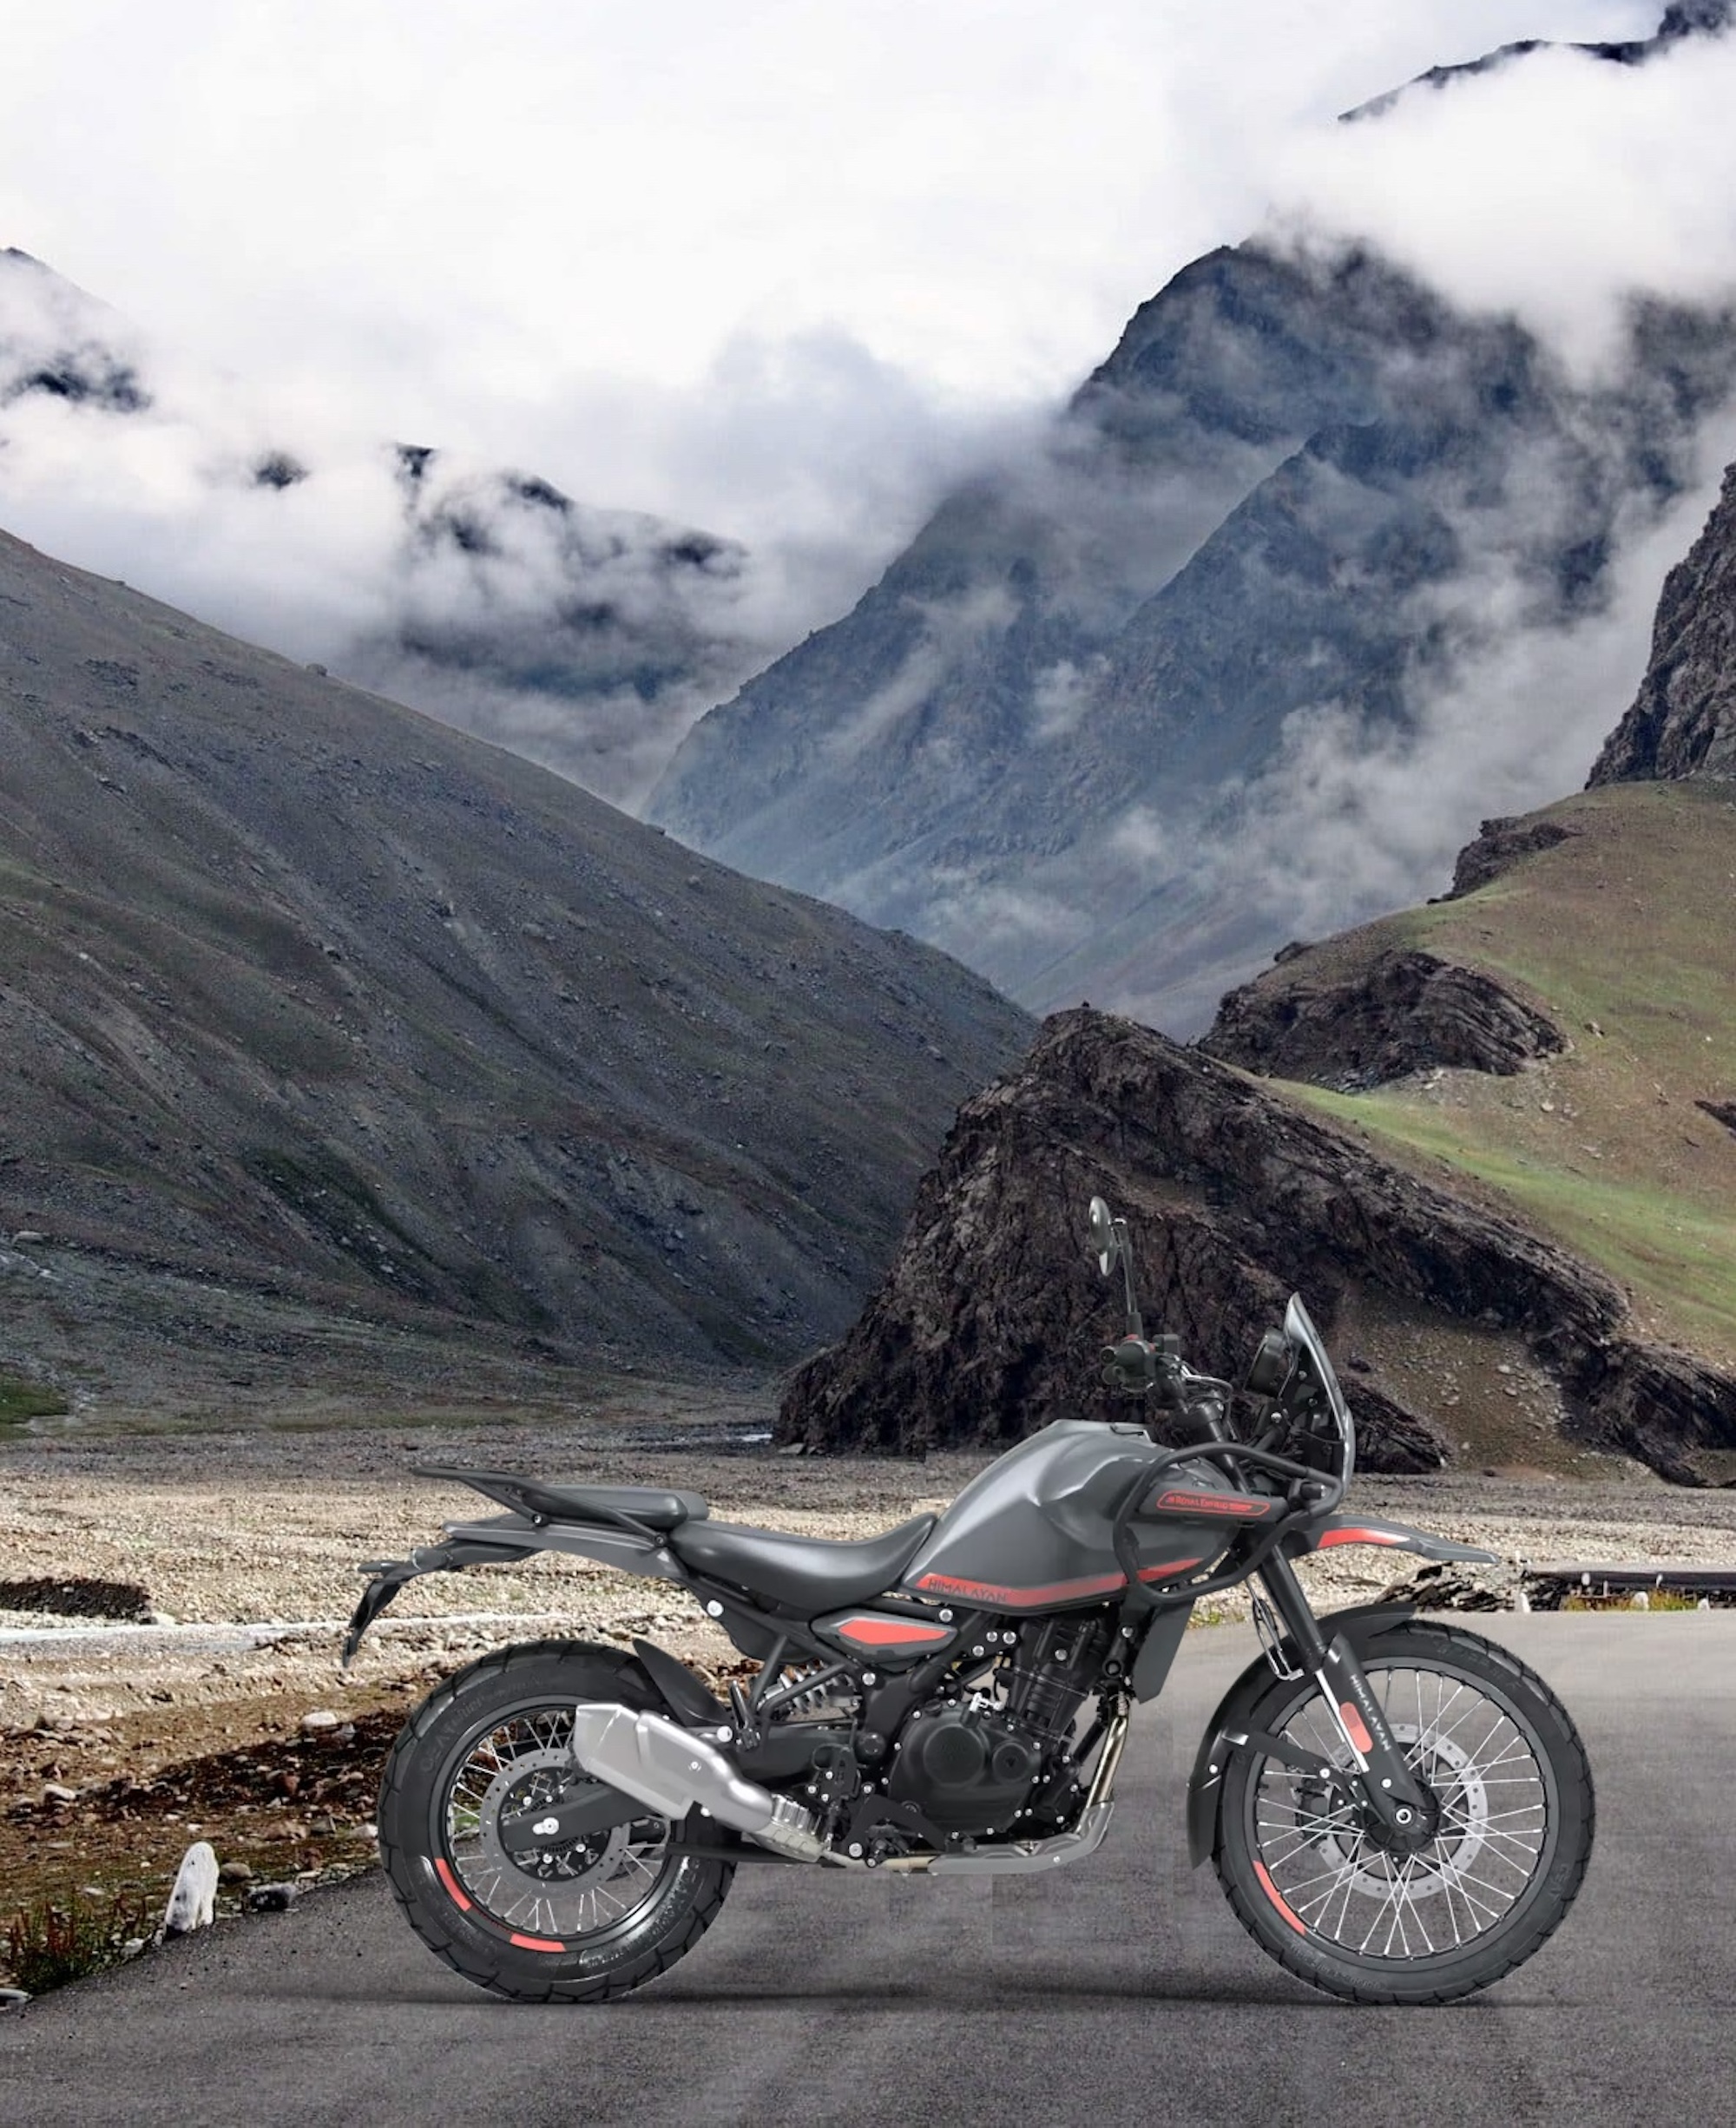 An adventure bike in front of mountains.